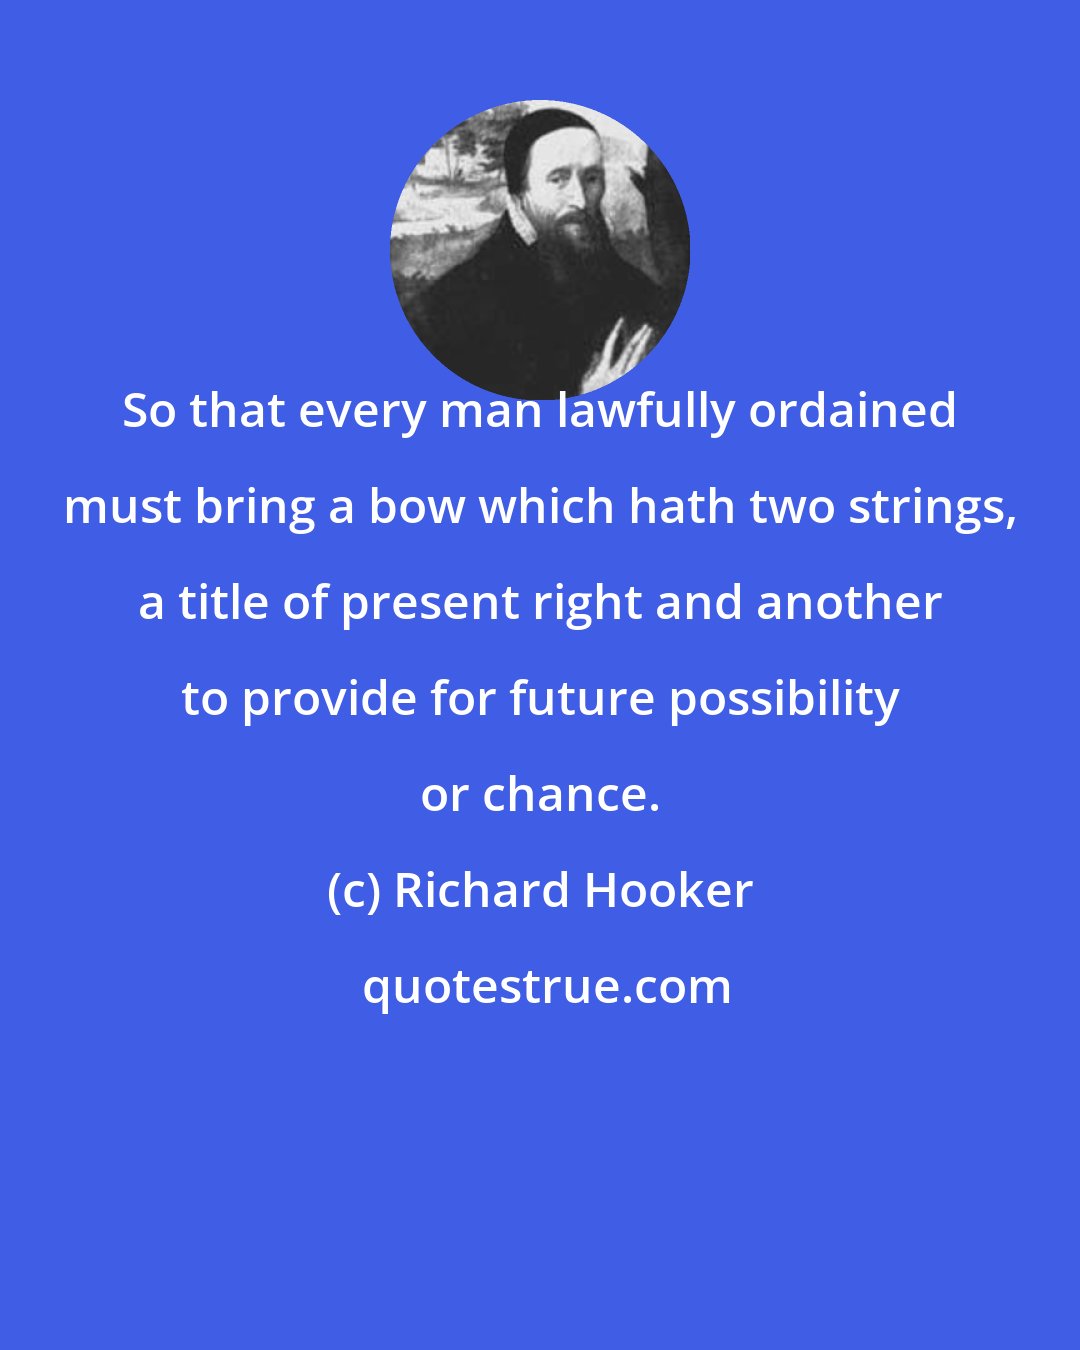 Richard Hooker: So that every man lawfully ordained must bring a bow which hath two strings, a title of present right and another to provide for future possibility or chance.